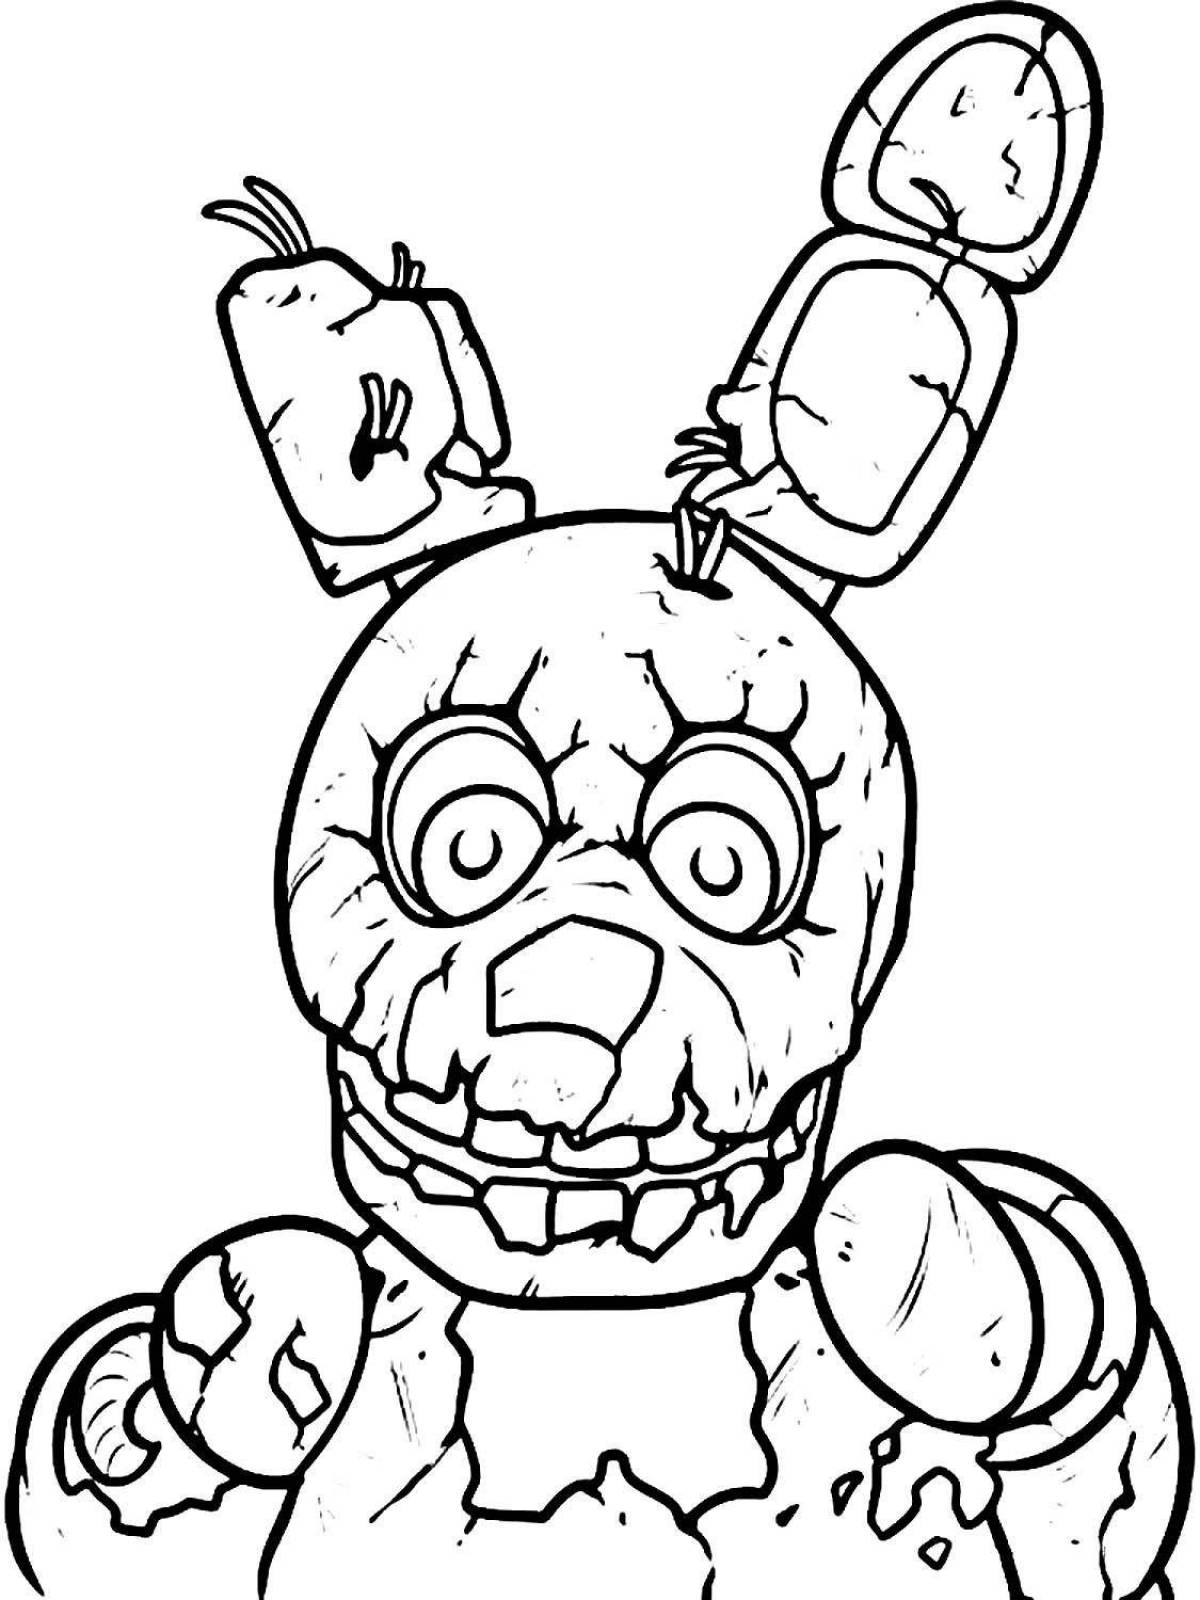 Radiant coloring page of lefty